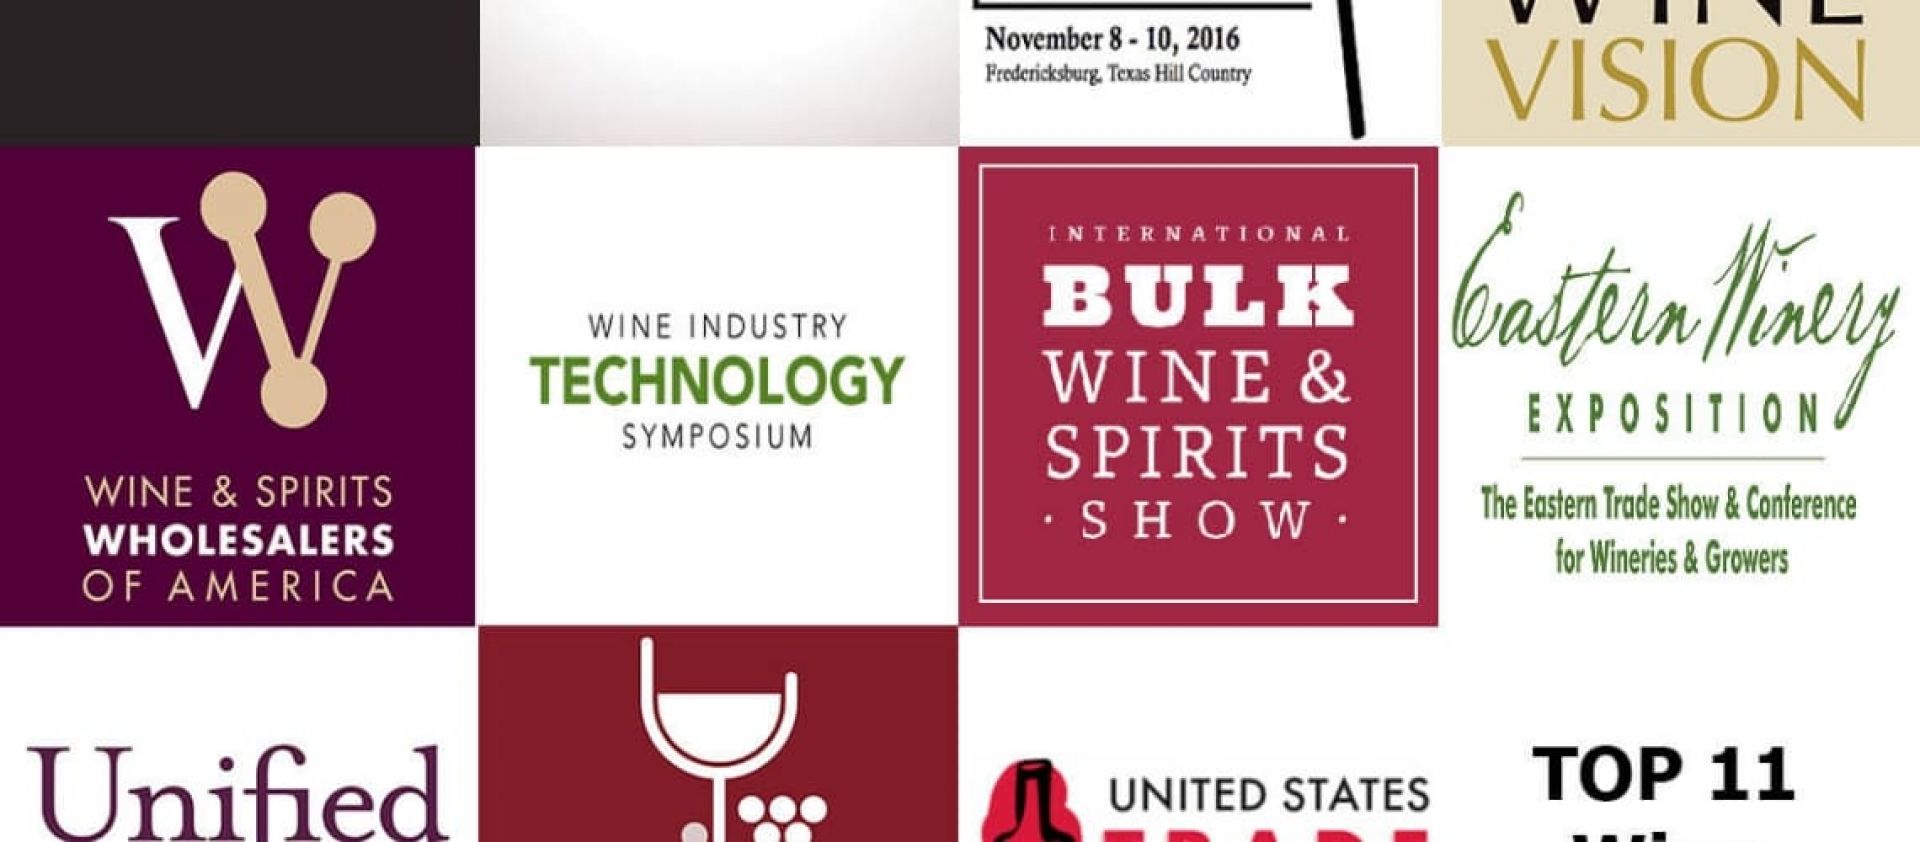 Photo for: Top 20 Wine Conferences in the World